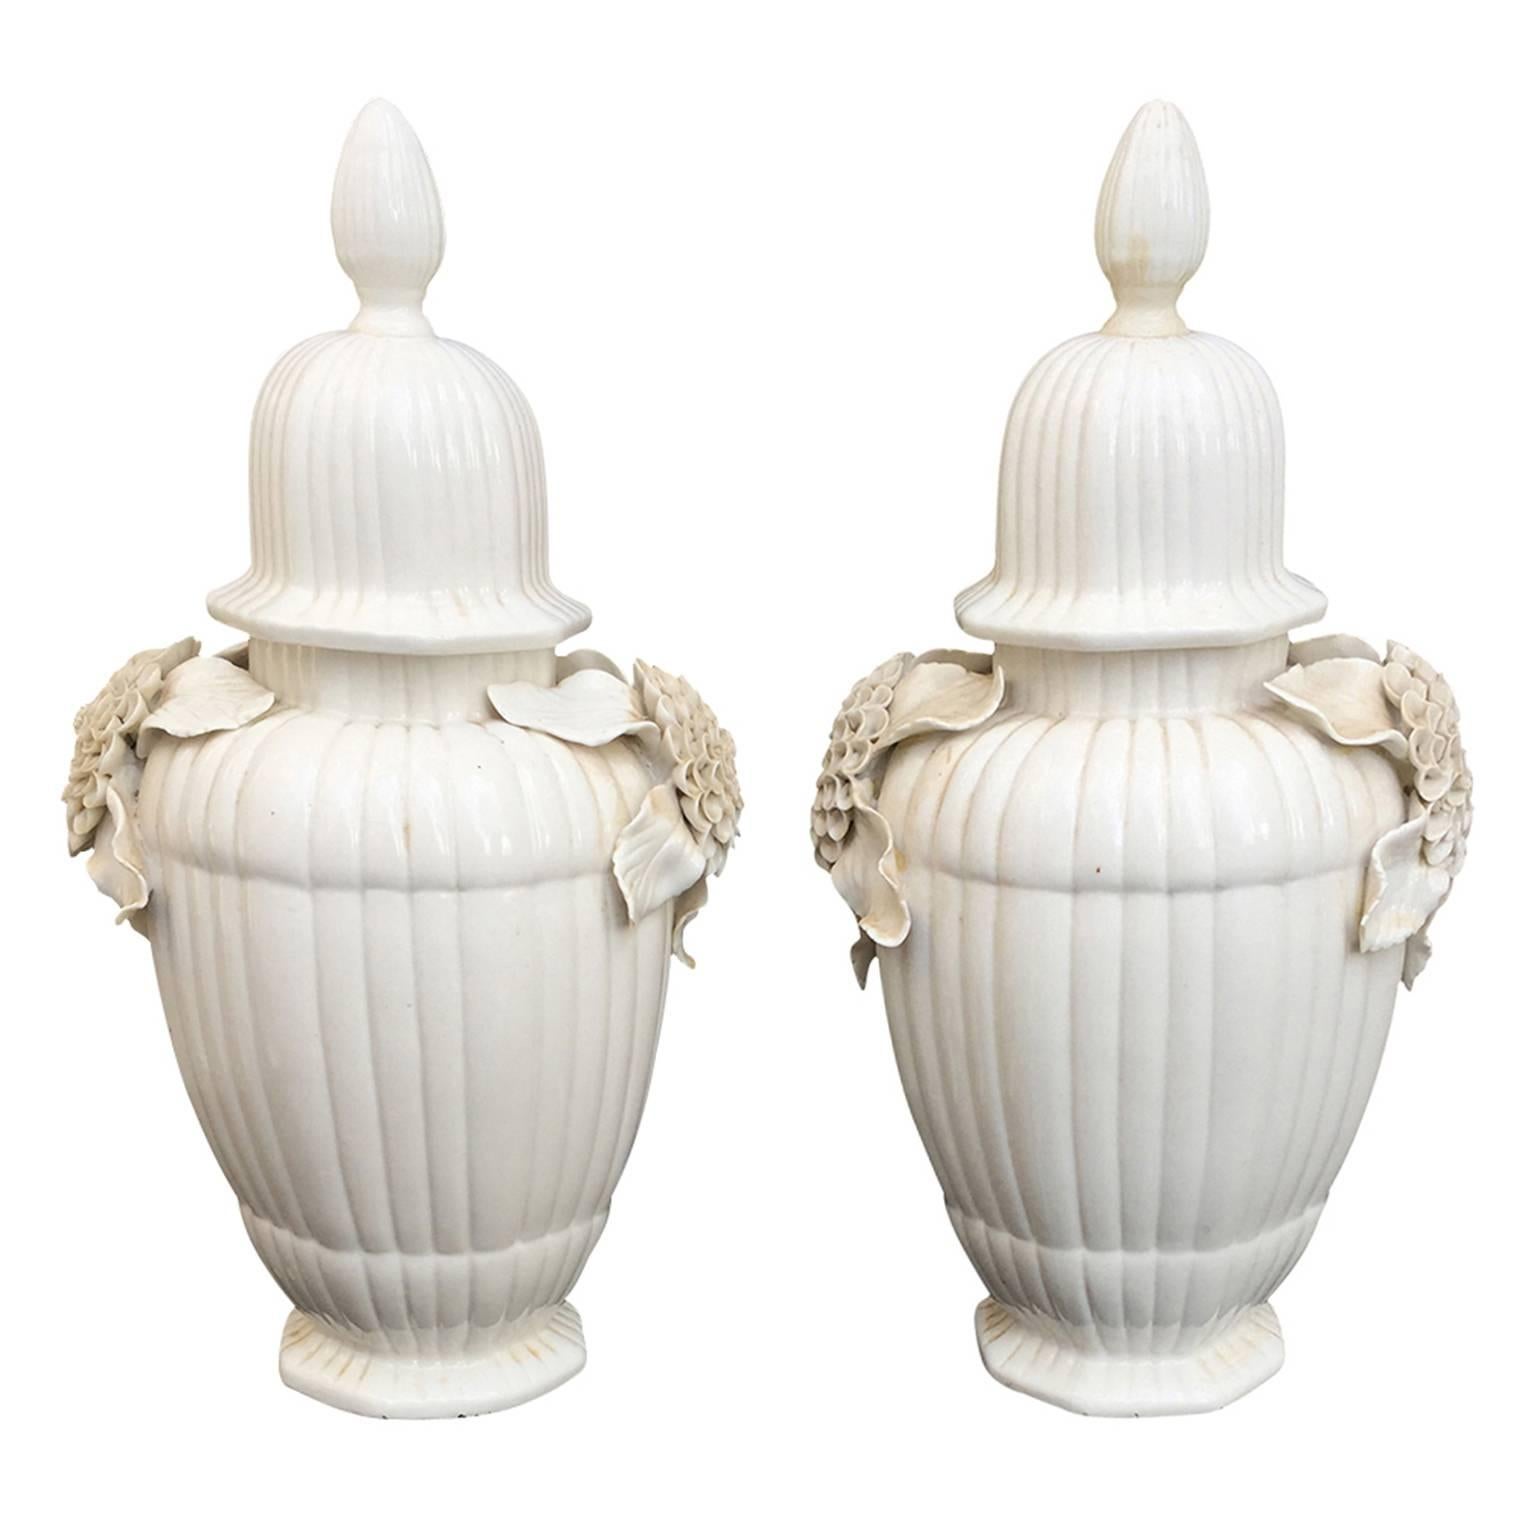 Pair of Early 20th Century Italian Glazed Floral Covered Jars